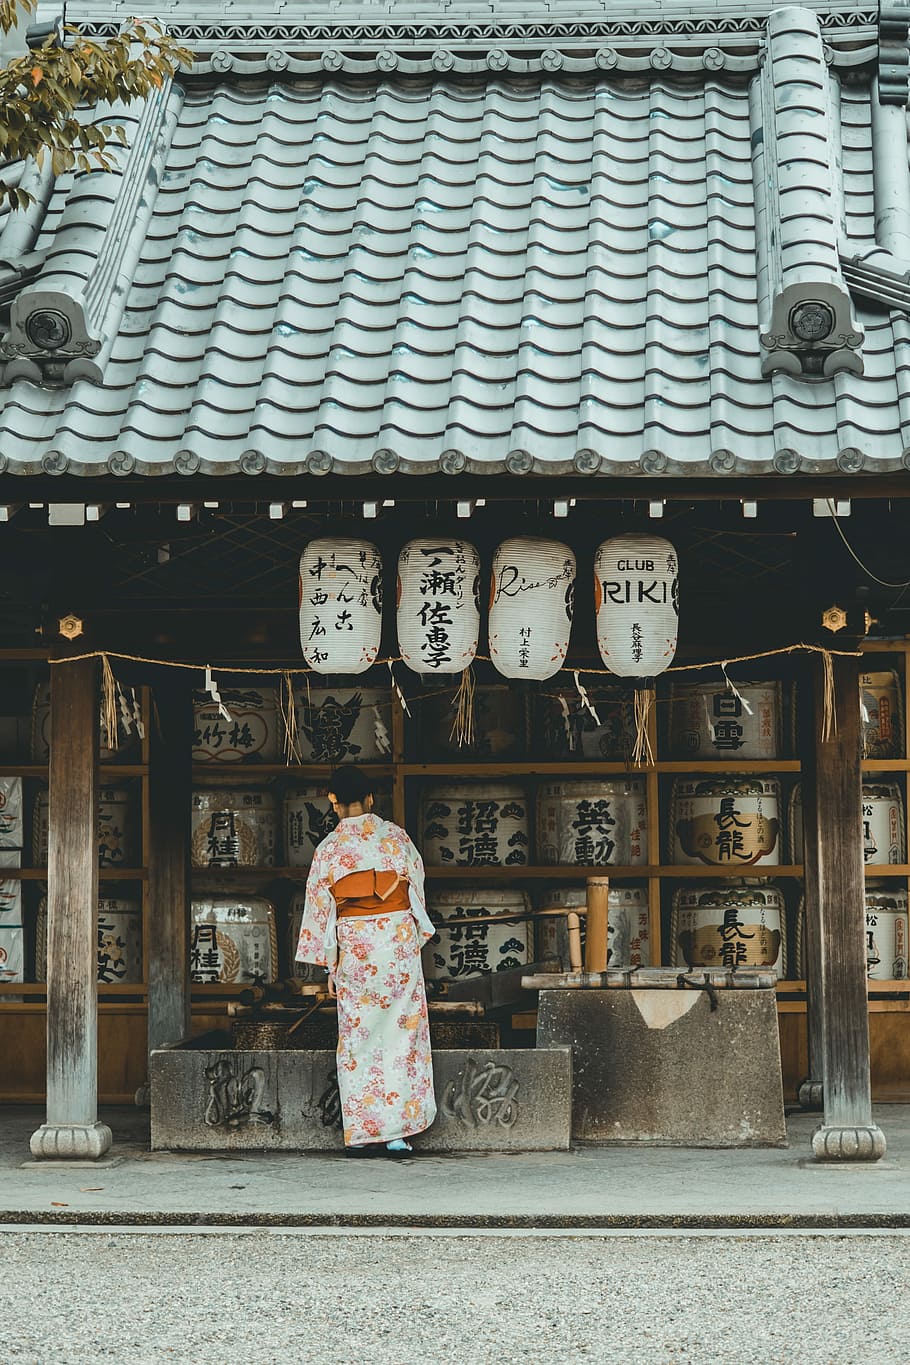 woman wearing orange and white kimono dress standing near the house, woman standing in front of house